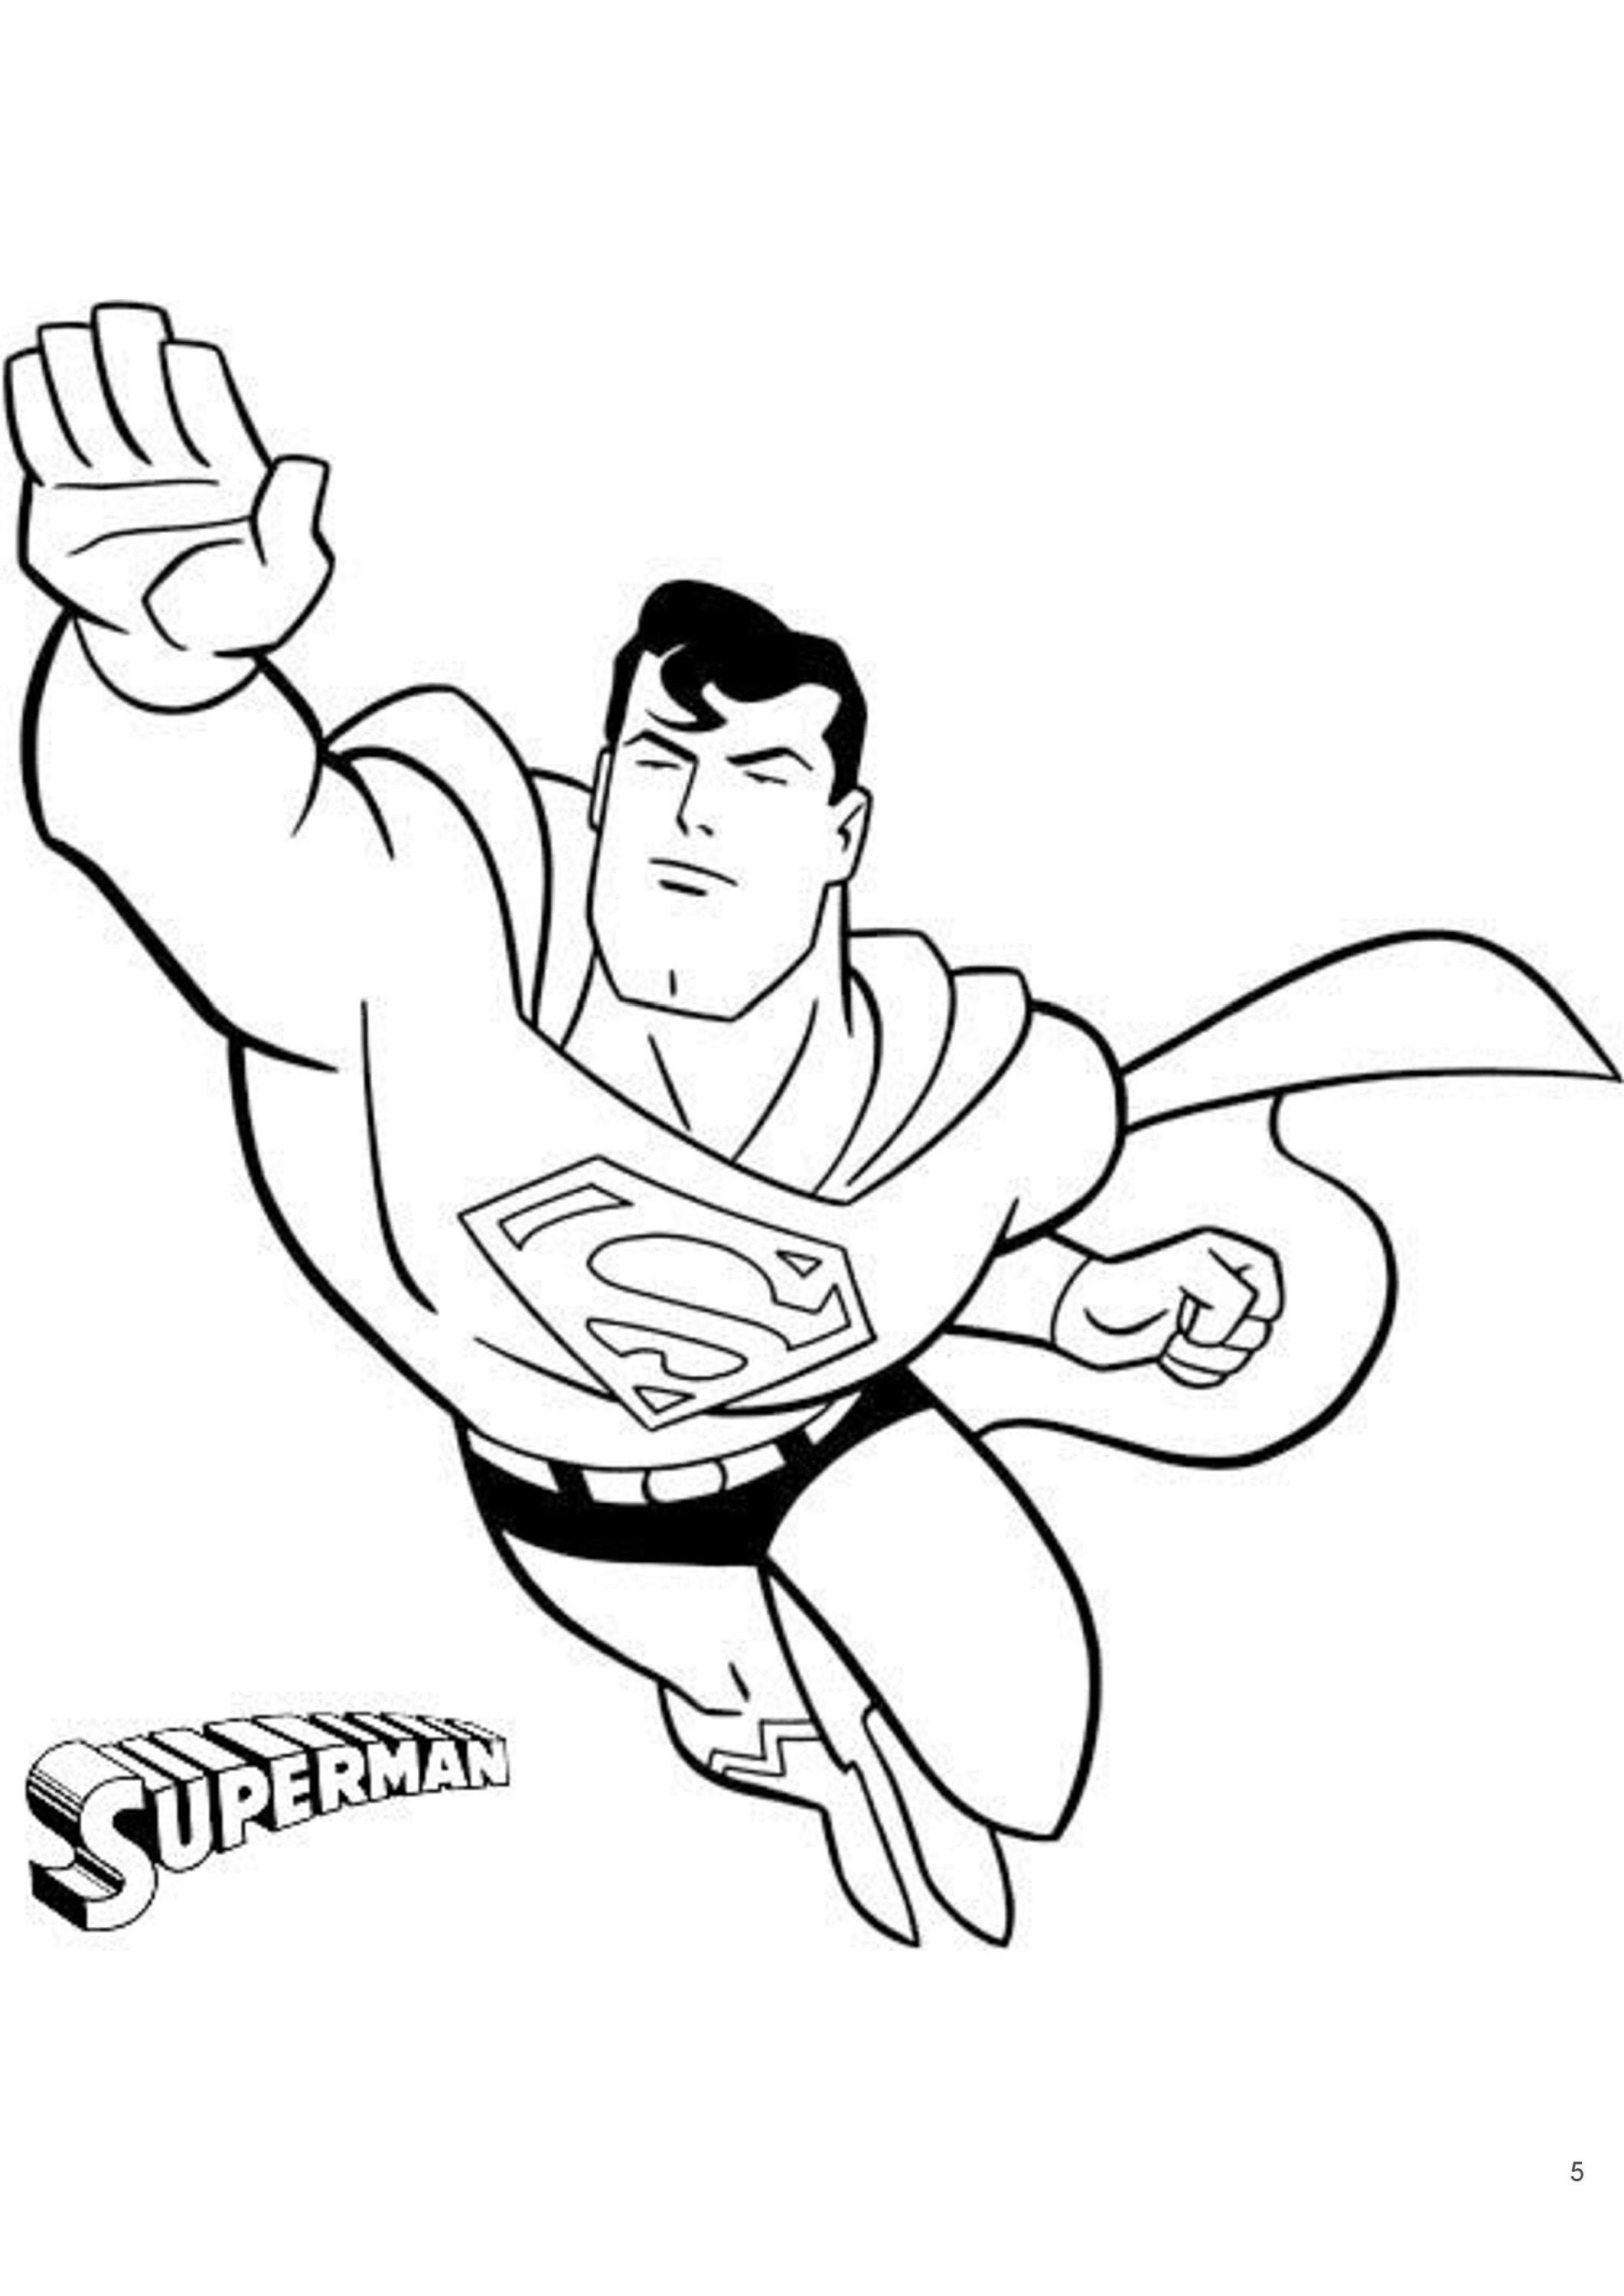 Over printable adultchild super heroes coloring pages